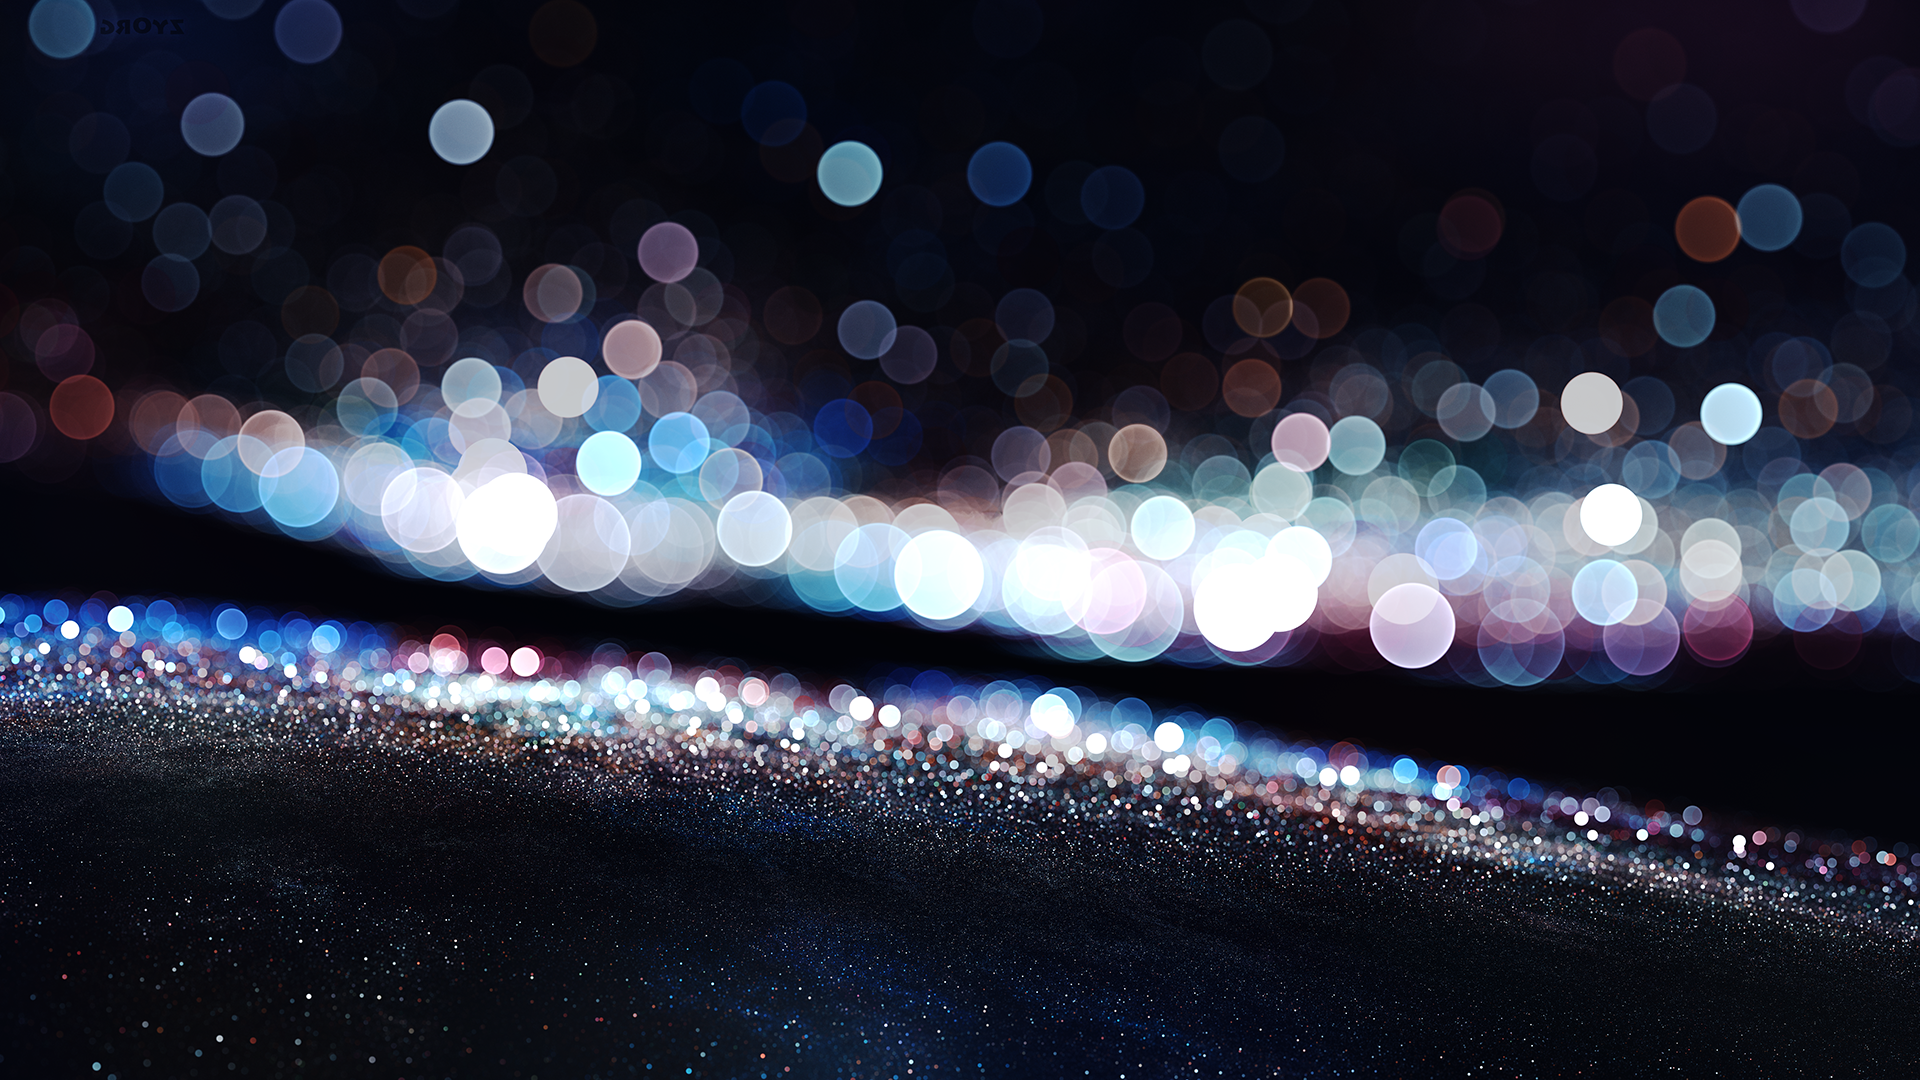 Top Blurry Lights Wallpaper Image for